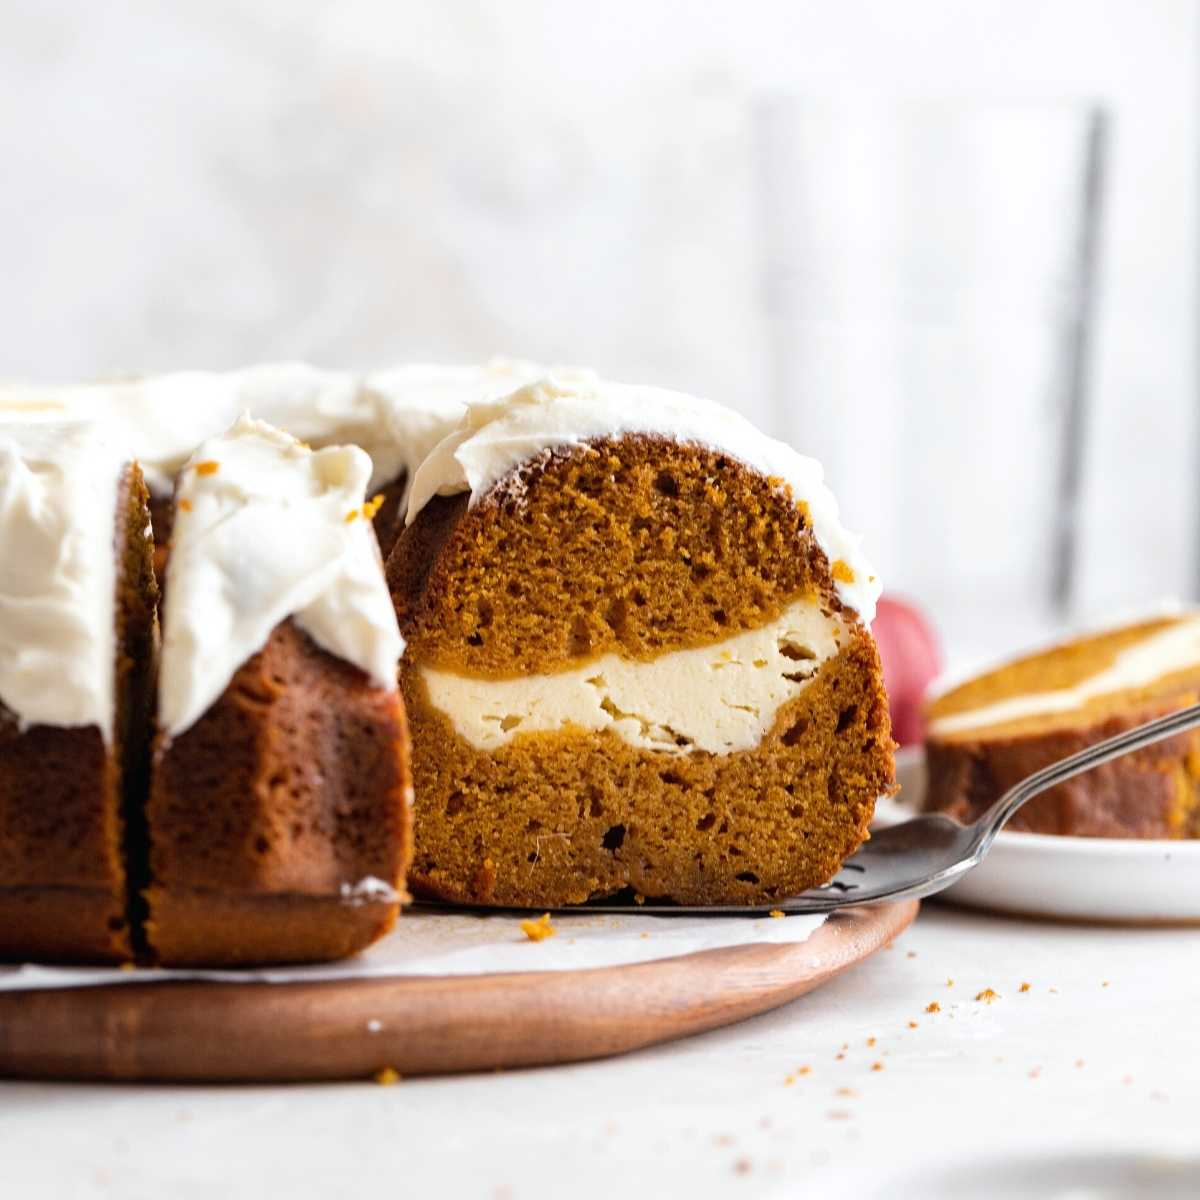 Pumpkin Cheesecake Bundt Cake on cake plate with slice removed